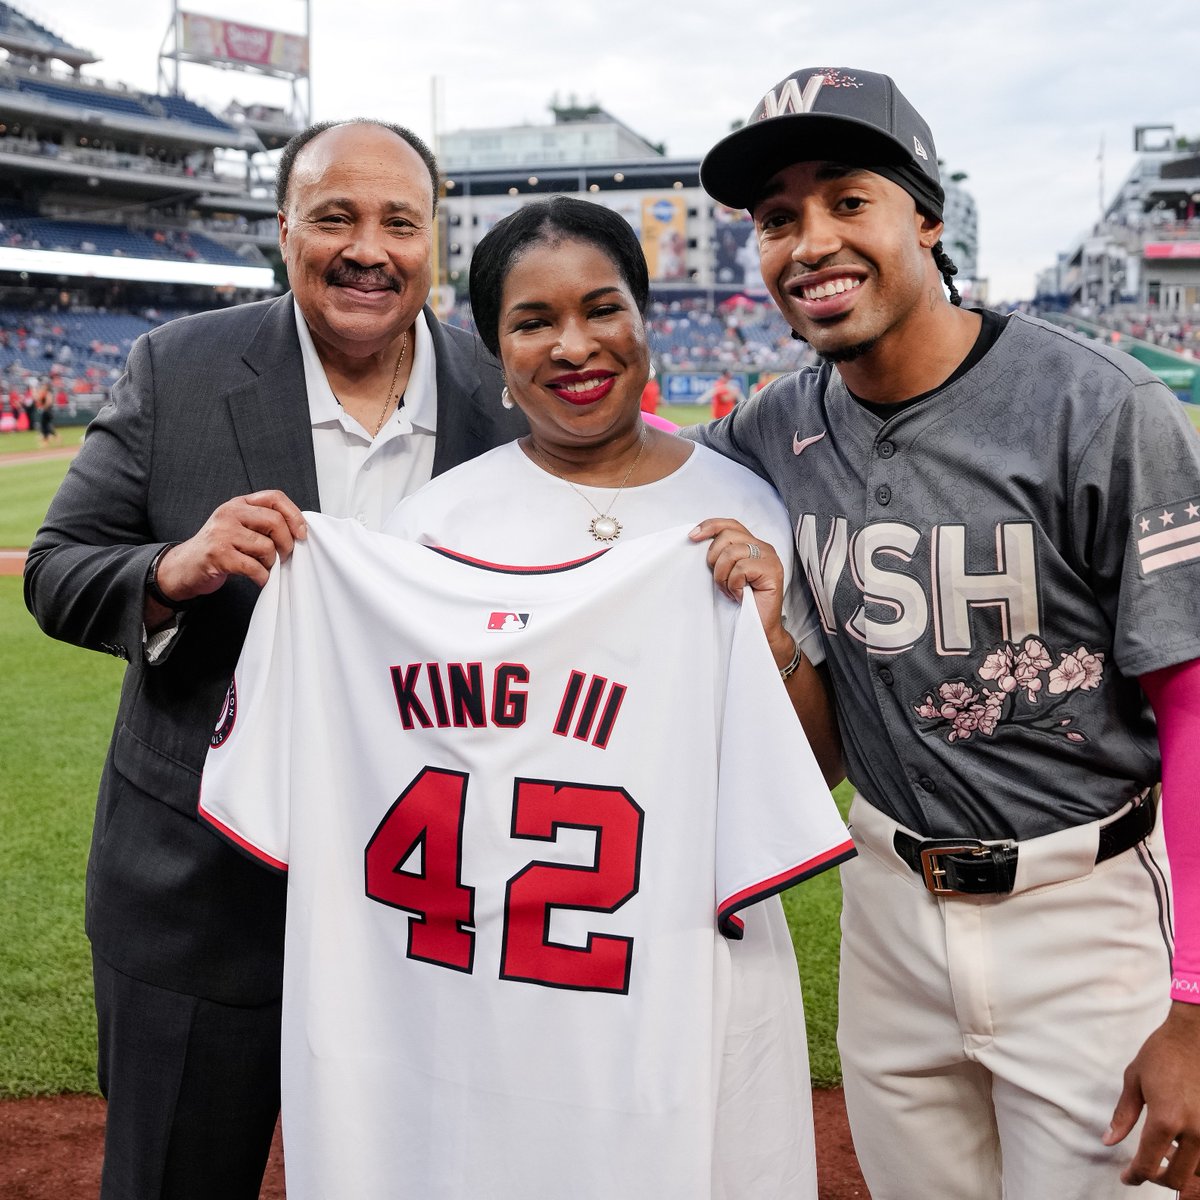 We were honored last night to welcome champions for global human and civil rights @OfficialMLK3 and @ArndreaKing to Nationals Park!